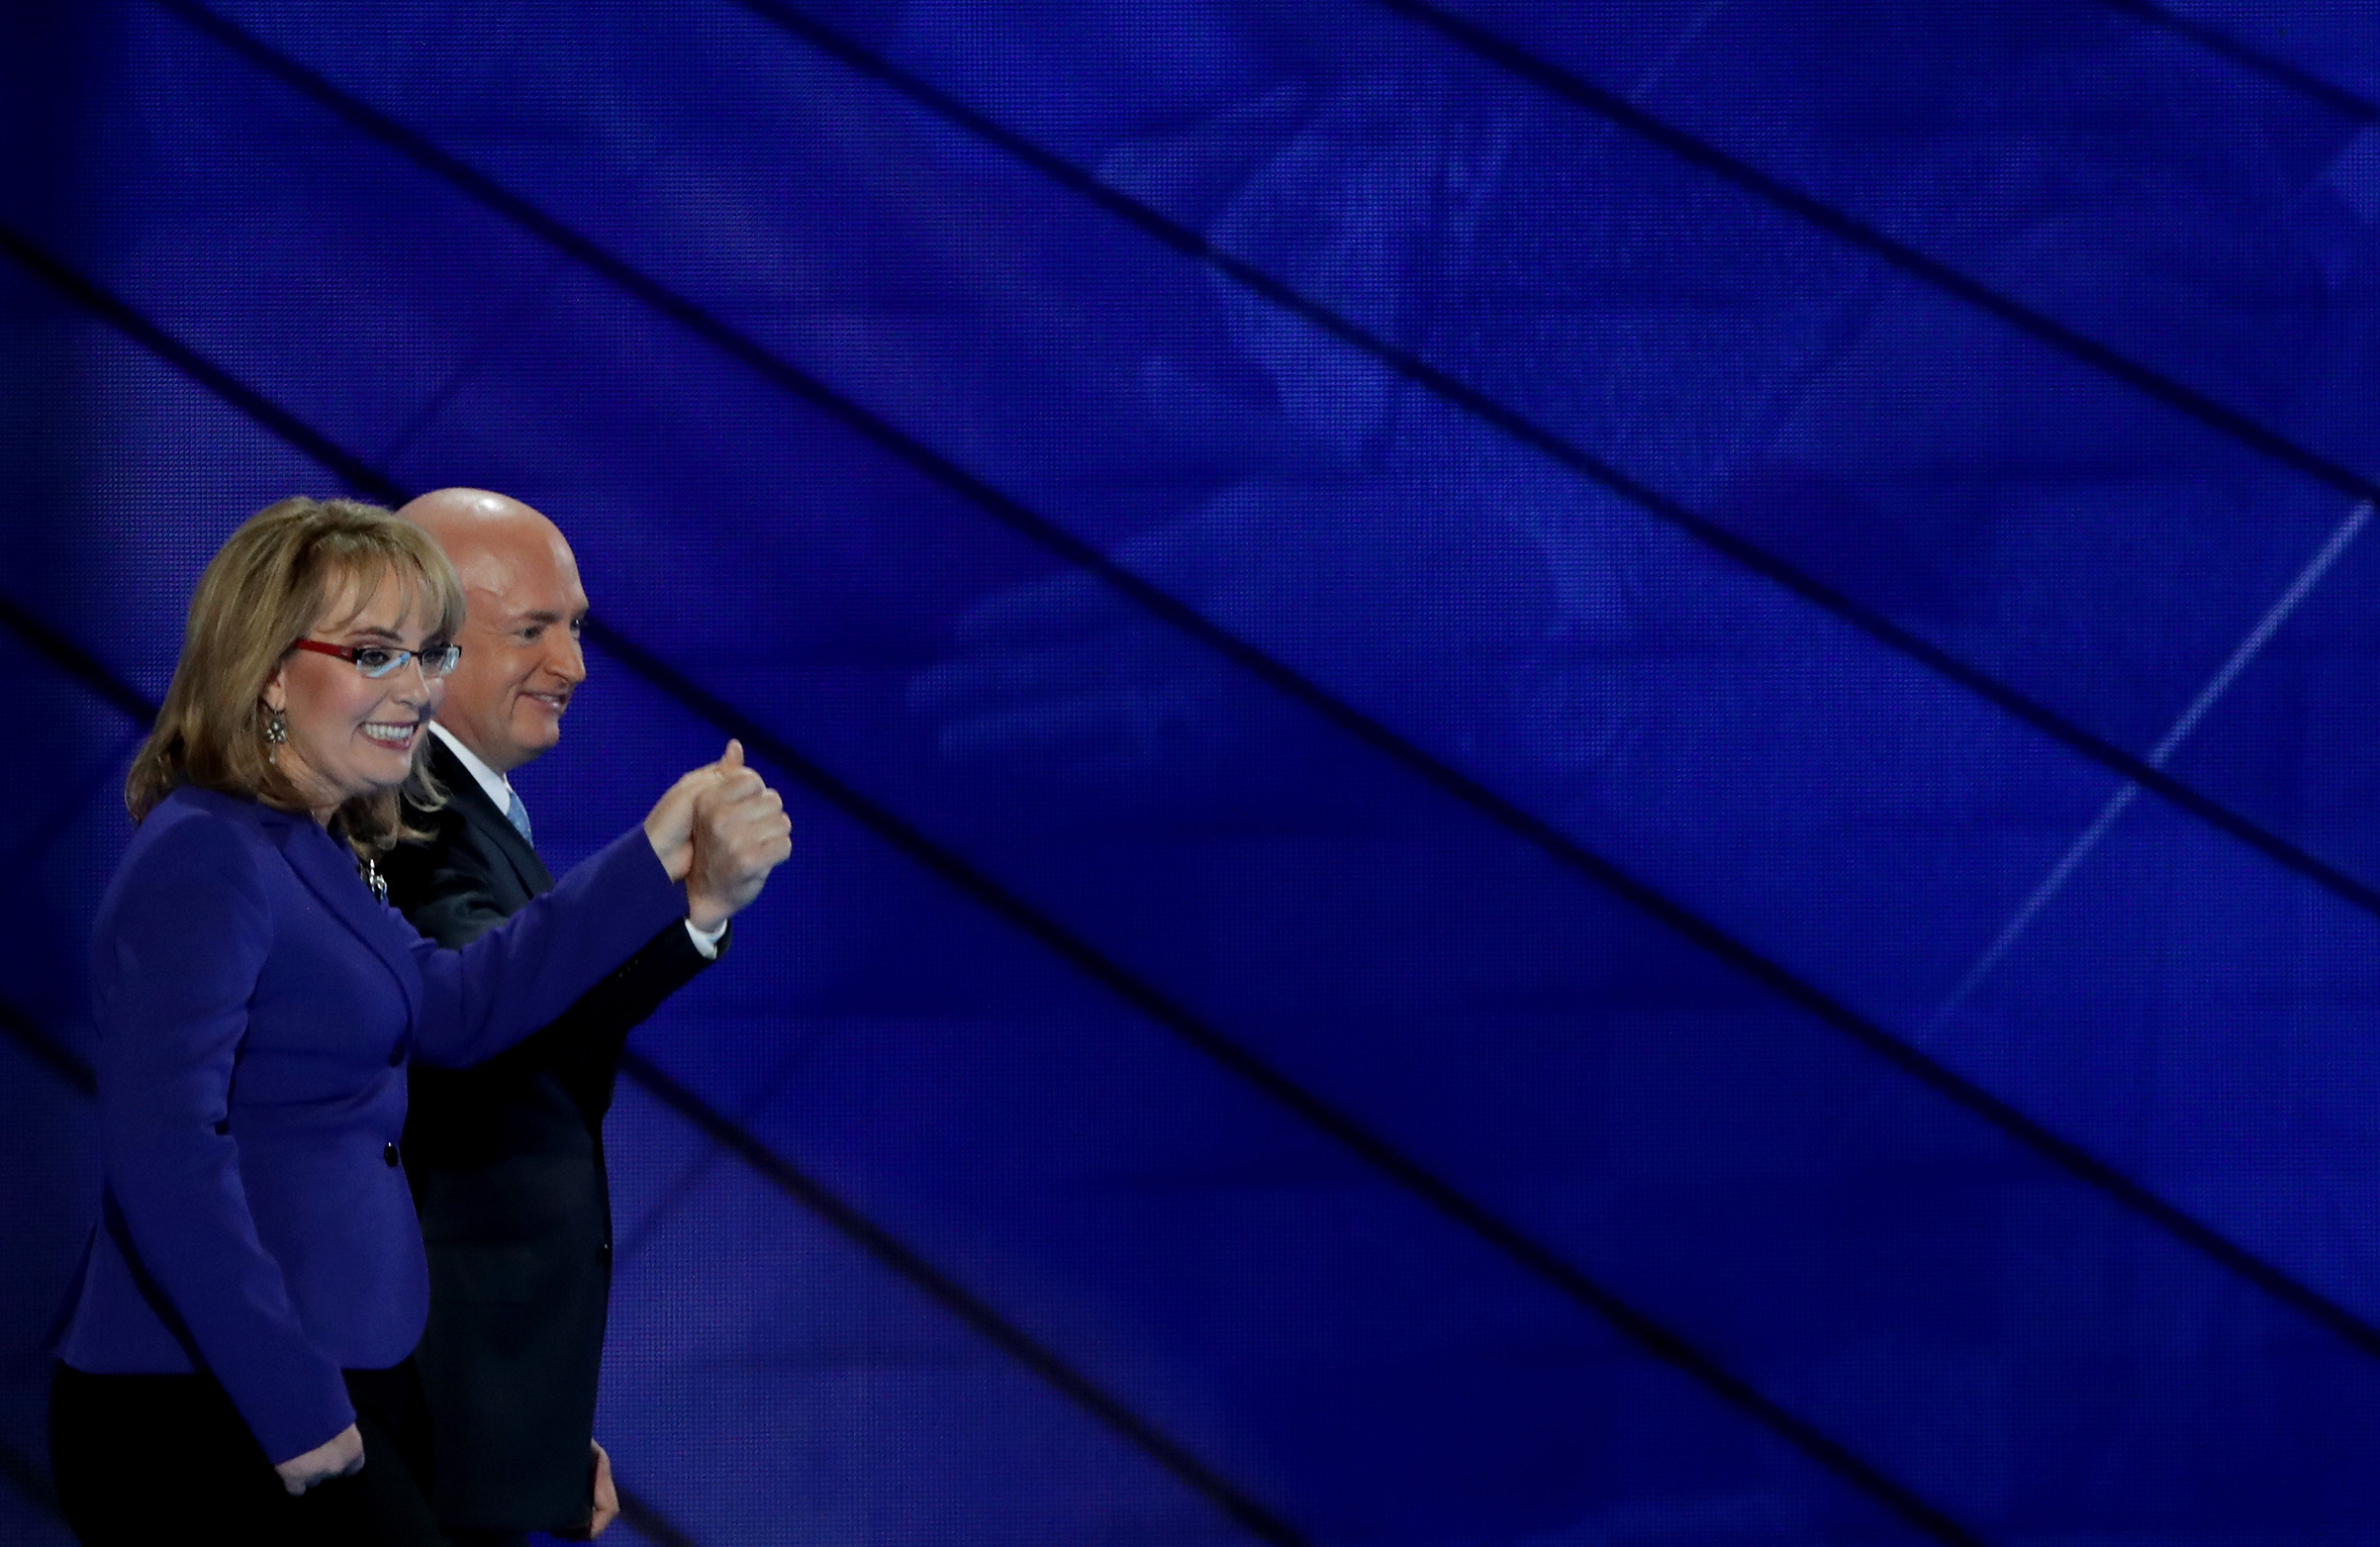 Former Congresswoman Gabby Giffords and her husband, retired NASA Astronaut and Navy Captain Mark Kelly, hold hands as they walk off stage on the third day of the Democratic National Convention, July 27, 2016 in Philadelphia. (Alex Wong—Getty Images)